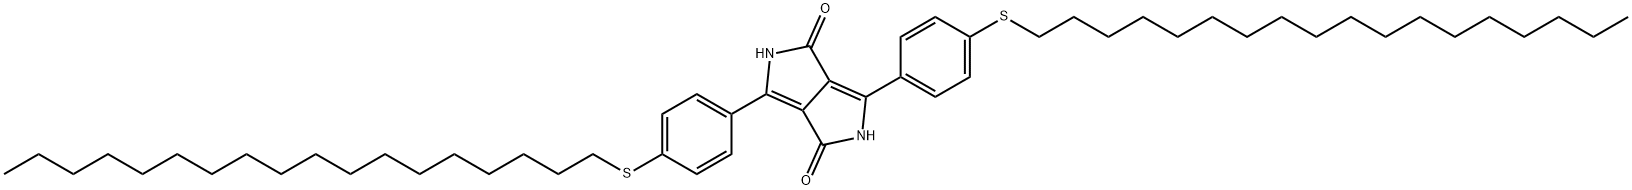 2,5-Dihydro-3,6-bis[4-(octadecylthio)phenyl]-pyrrolo[3,4-c]pyrrole-1,4-dione Structure